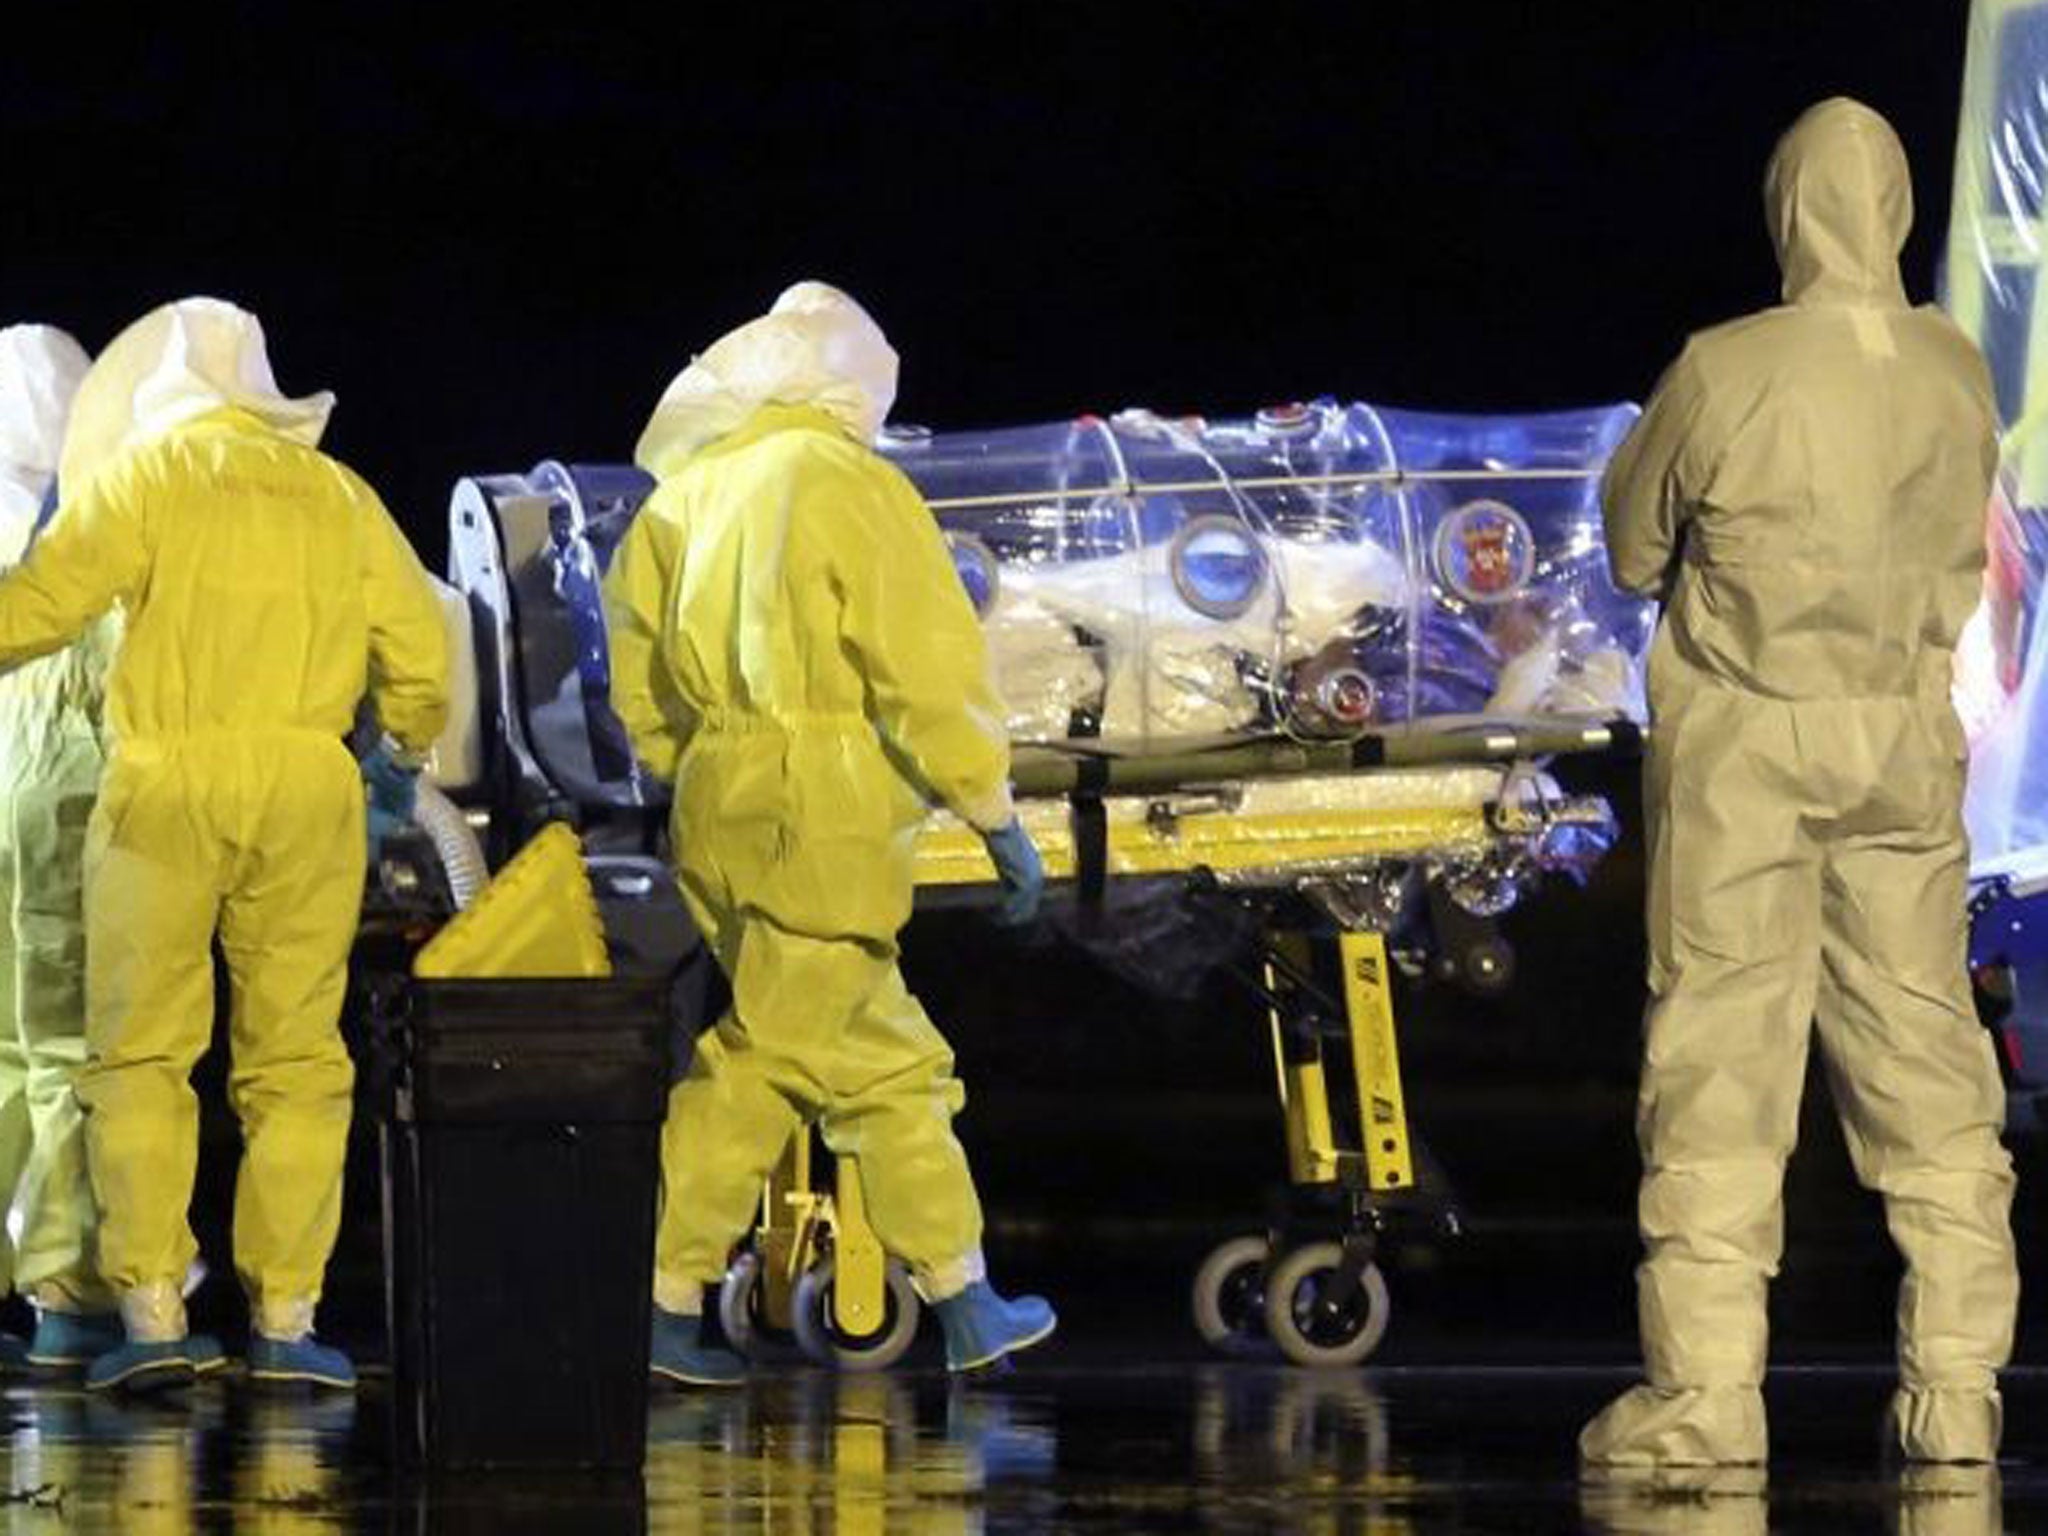 At least 164 NHS staff members have responded to a call for volunteers to help combat West Africa's Ebola outbreak